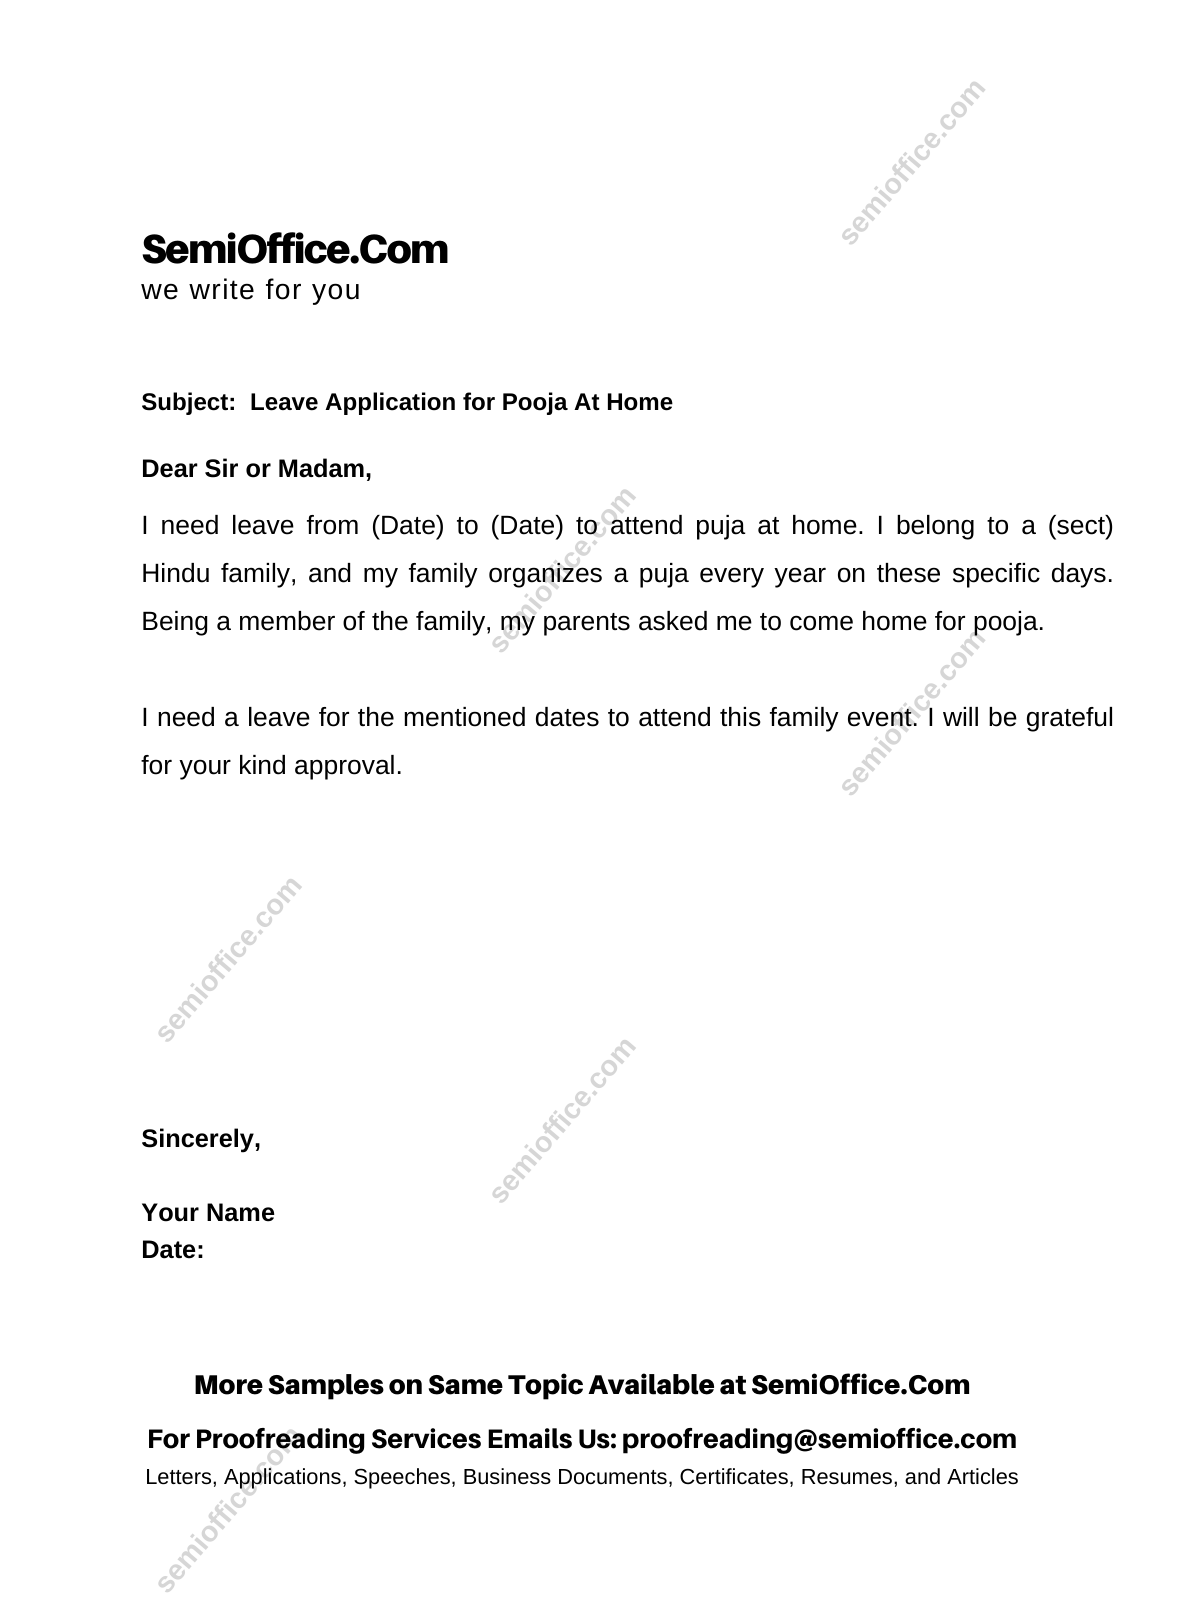 leave application letter for puja at home